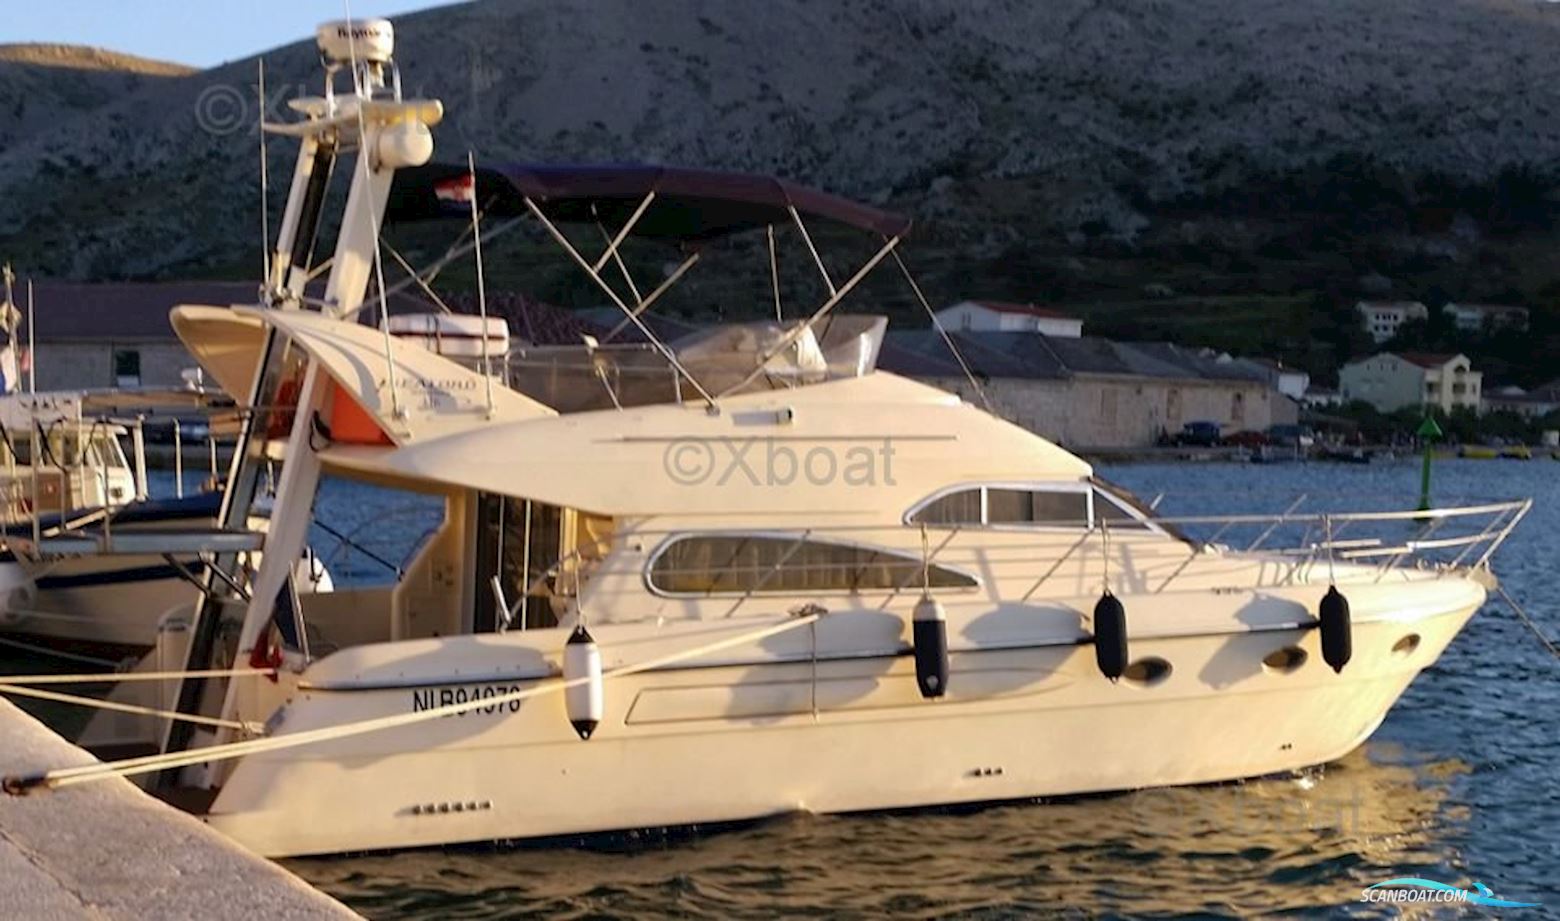 Diams Sealord Sealord 446 Motor boat 2002, with Volvo engine, France